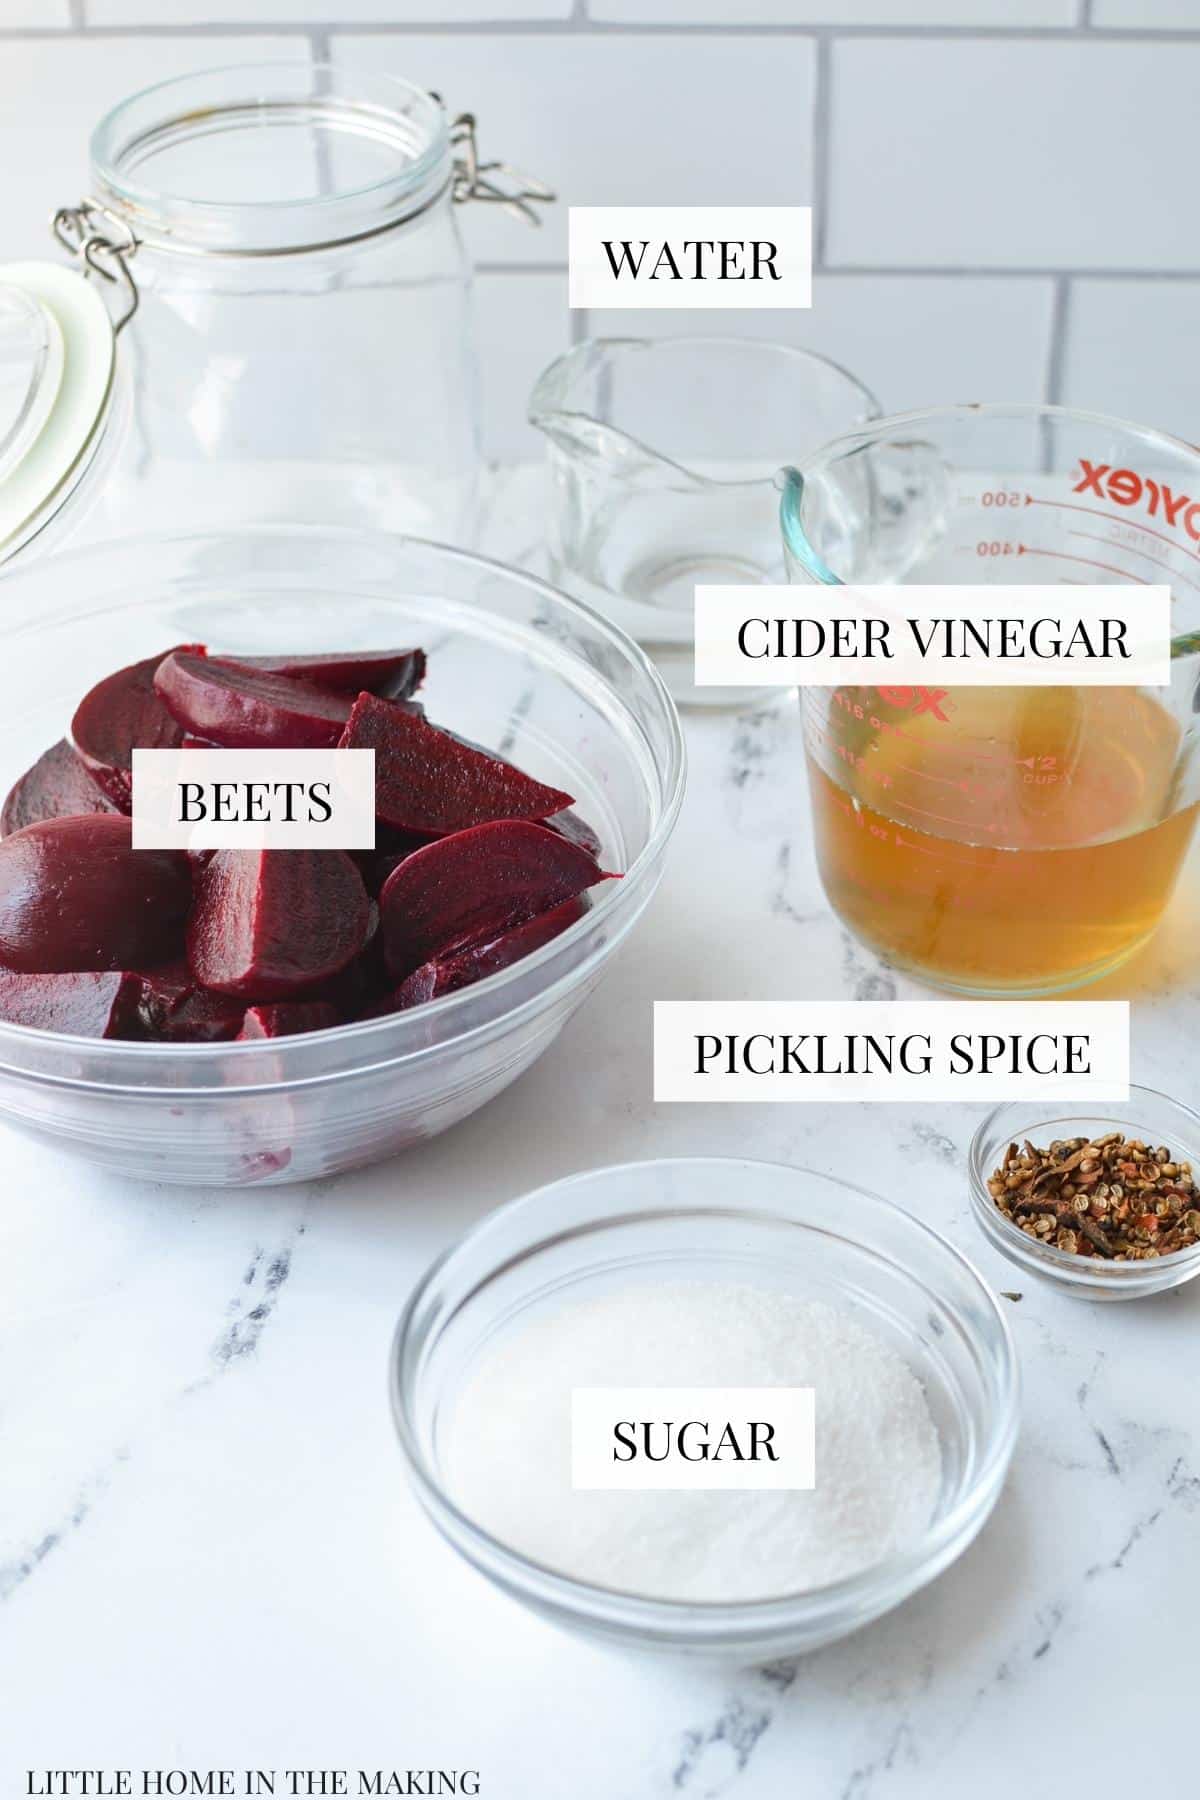 The ingredients needed to make refrigerator pickled beets.